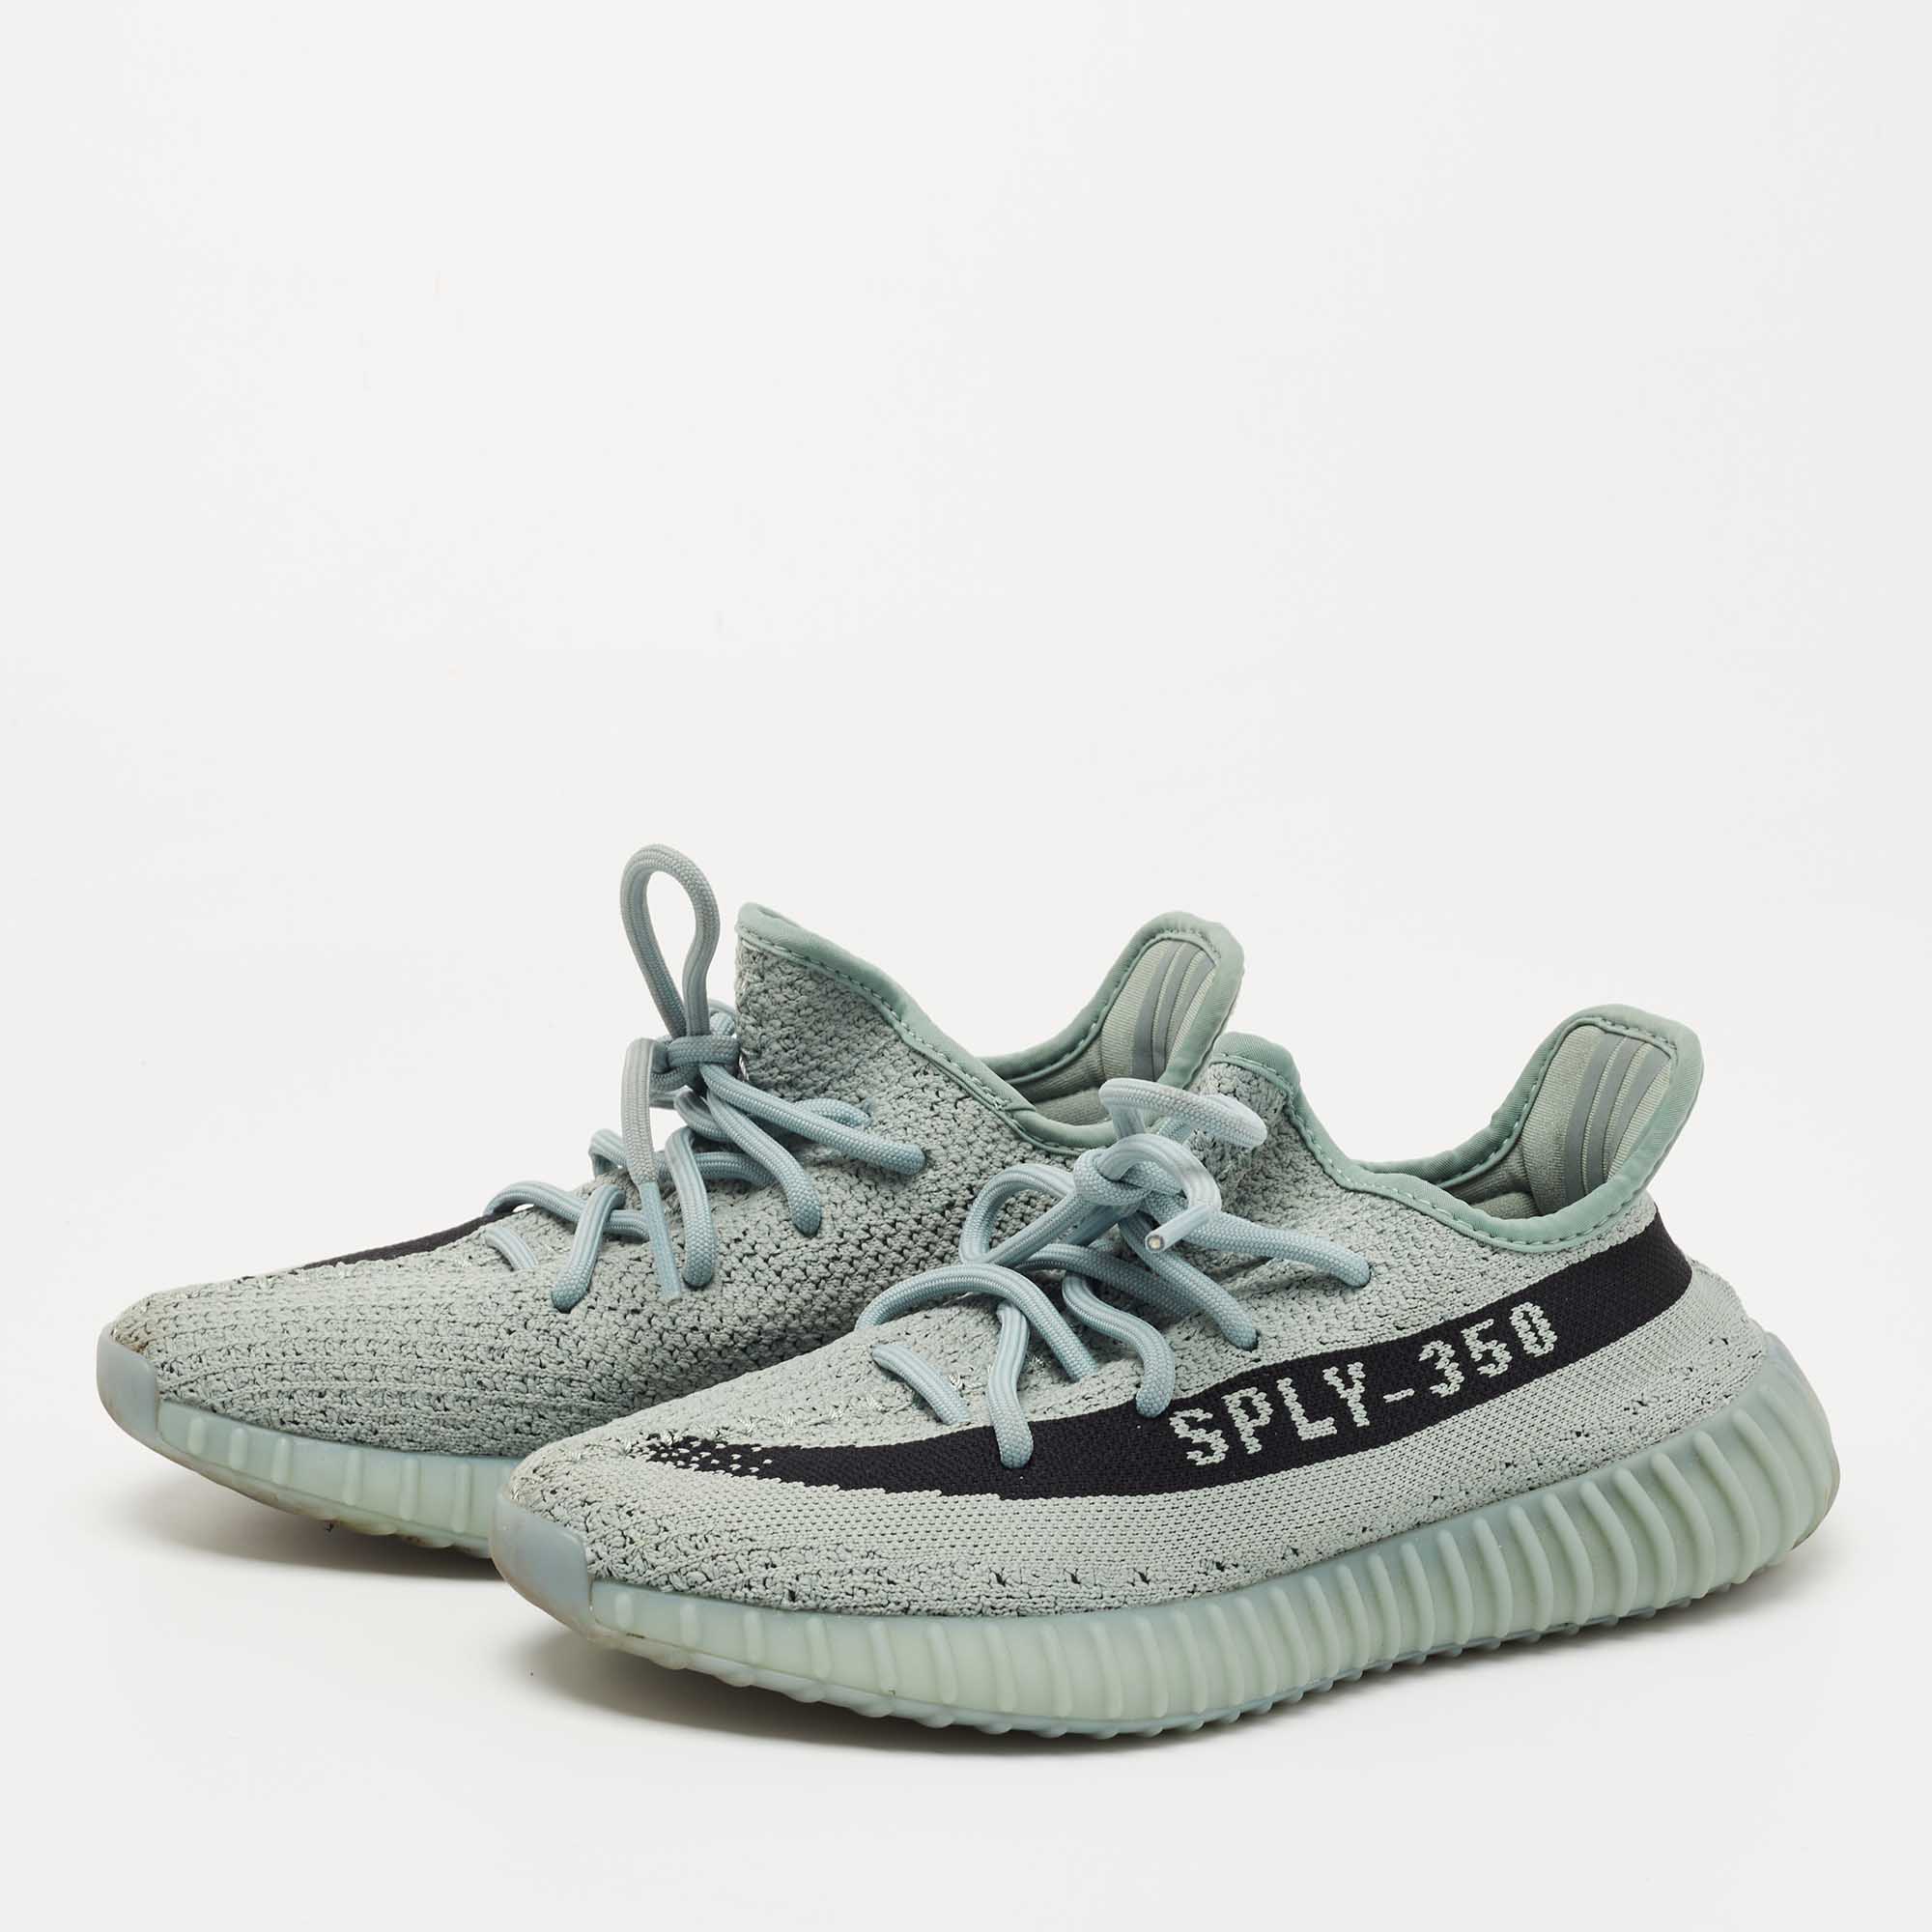 

Yeezy x Adidas Light Green Knit Fabric Boost 350 V2 Jade Ash Sneakers Size